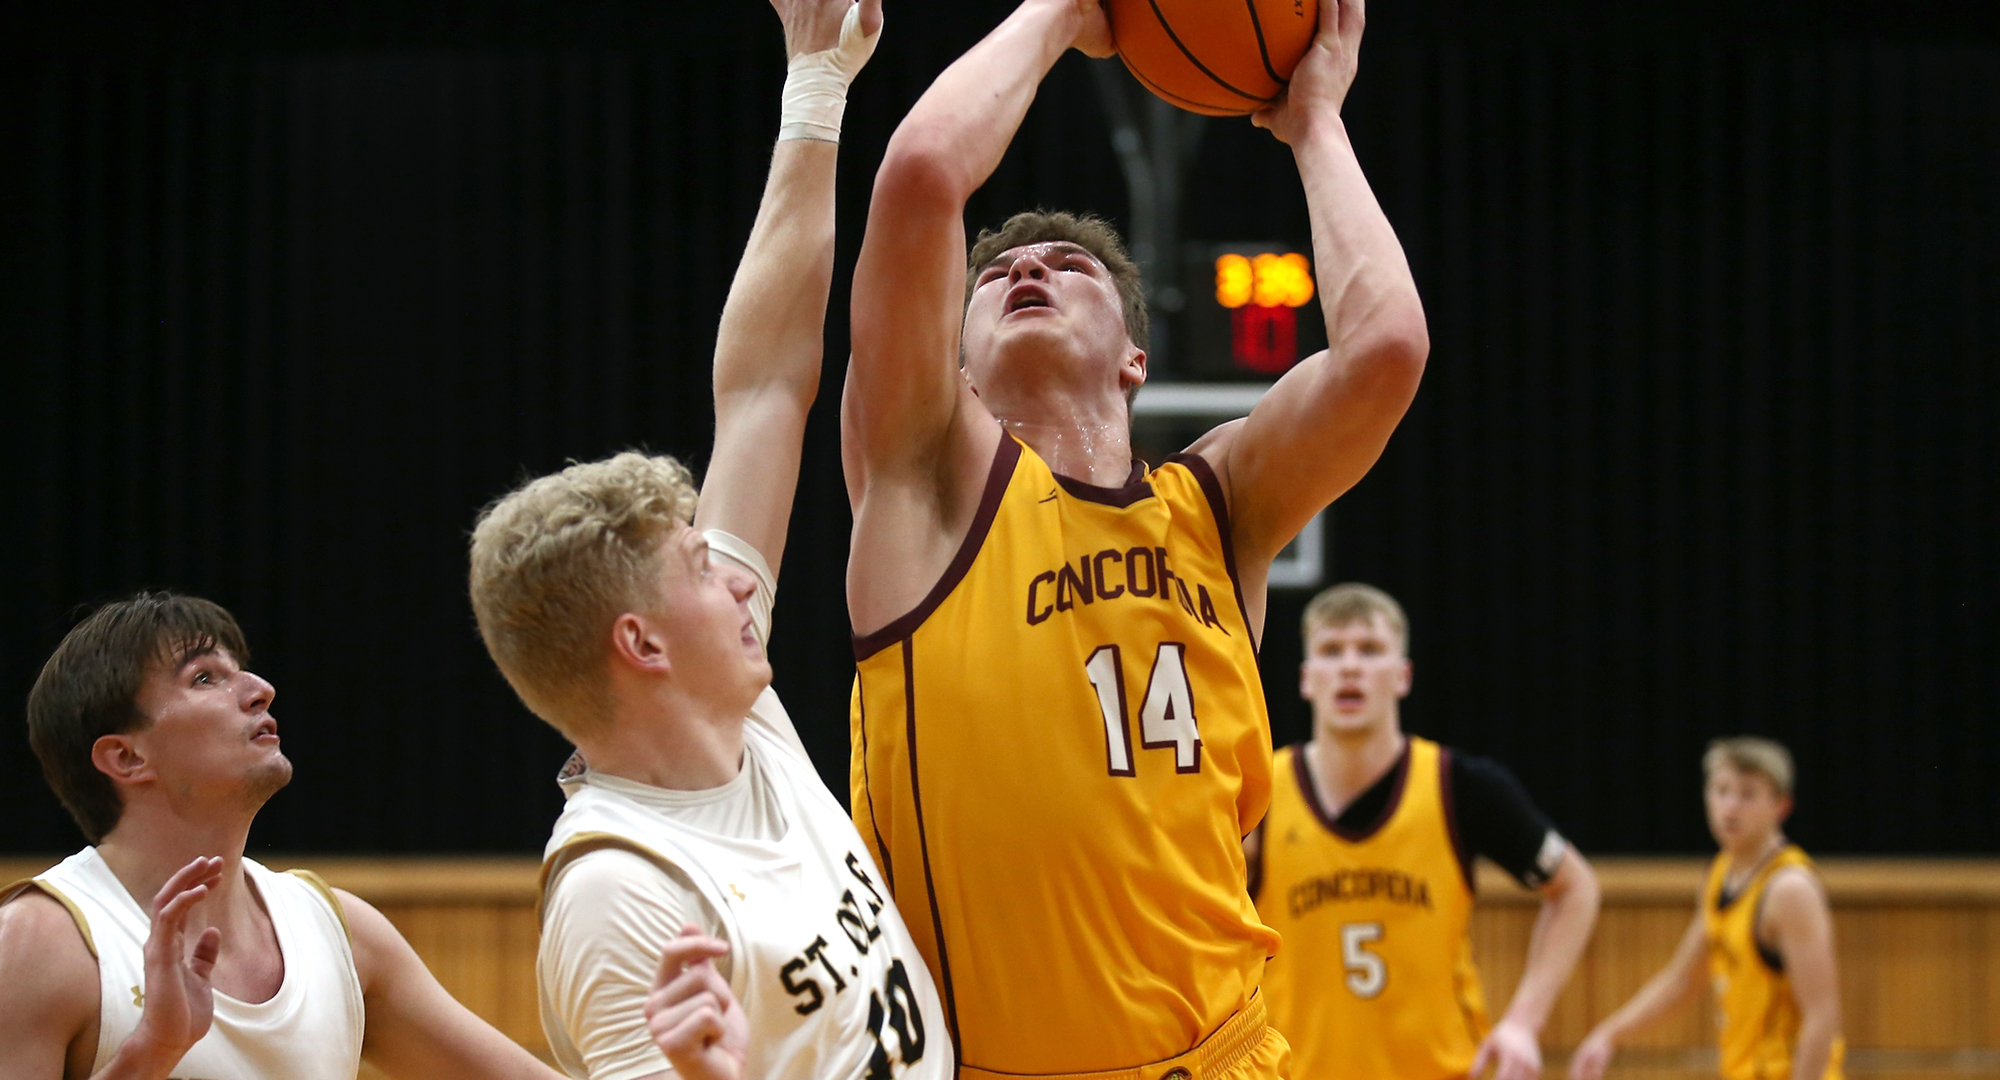 Rowan Nelson goes up for two of his team-high 13 points in the Cobbers' game at St. Olaf. (Photo courtesy of Ryan Coleman, D3photography.com)